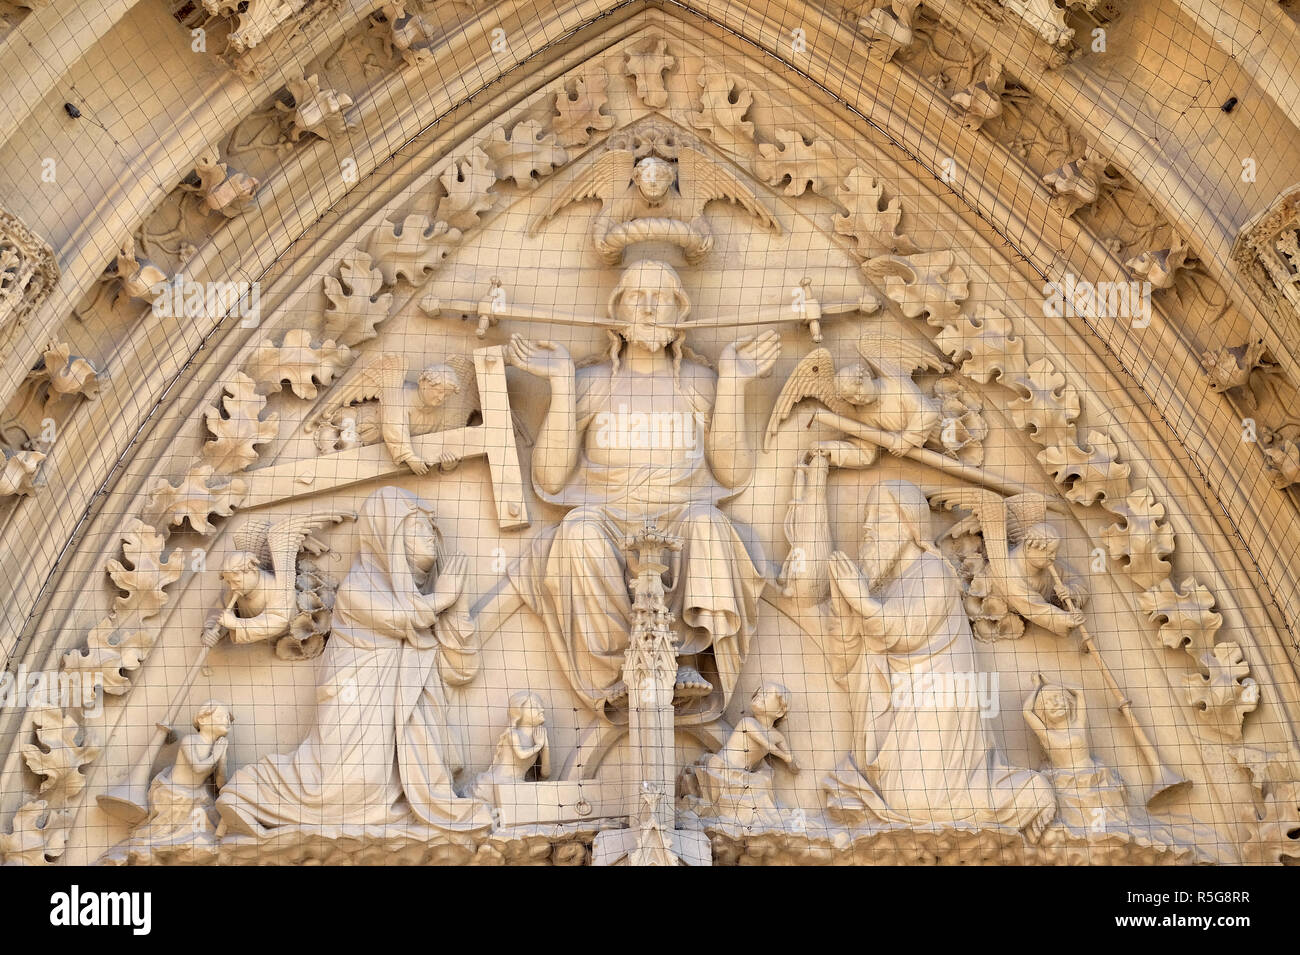 The tympanum shows the Last Judgment, portal of the Marienkapelle in Wurzburg, Bavaria, Germany Stock Photo